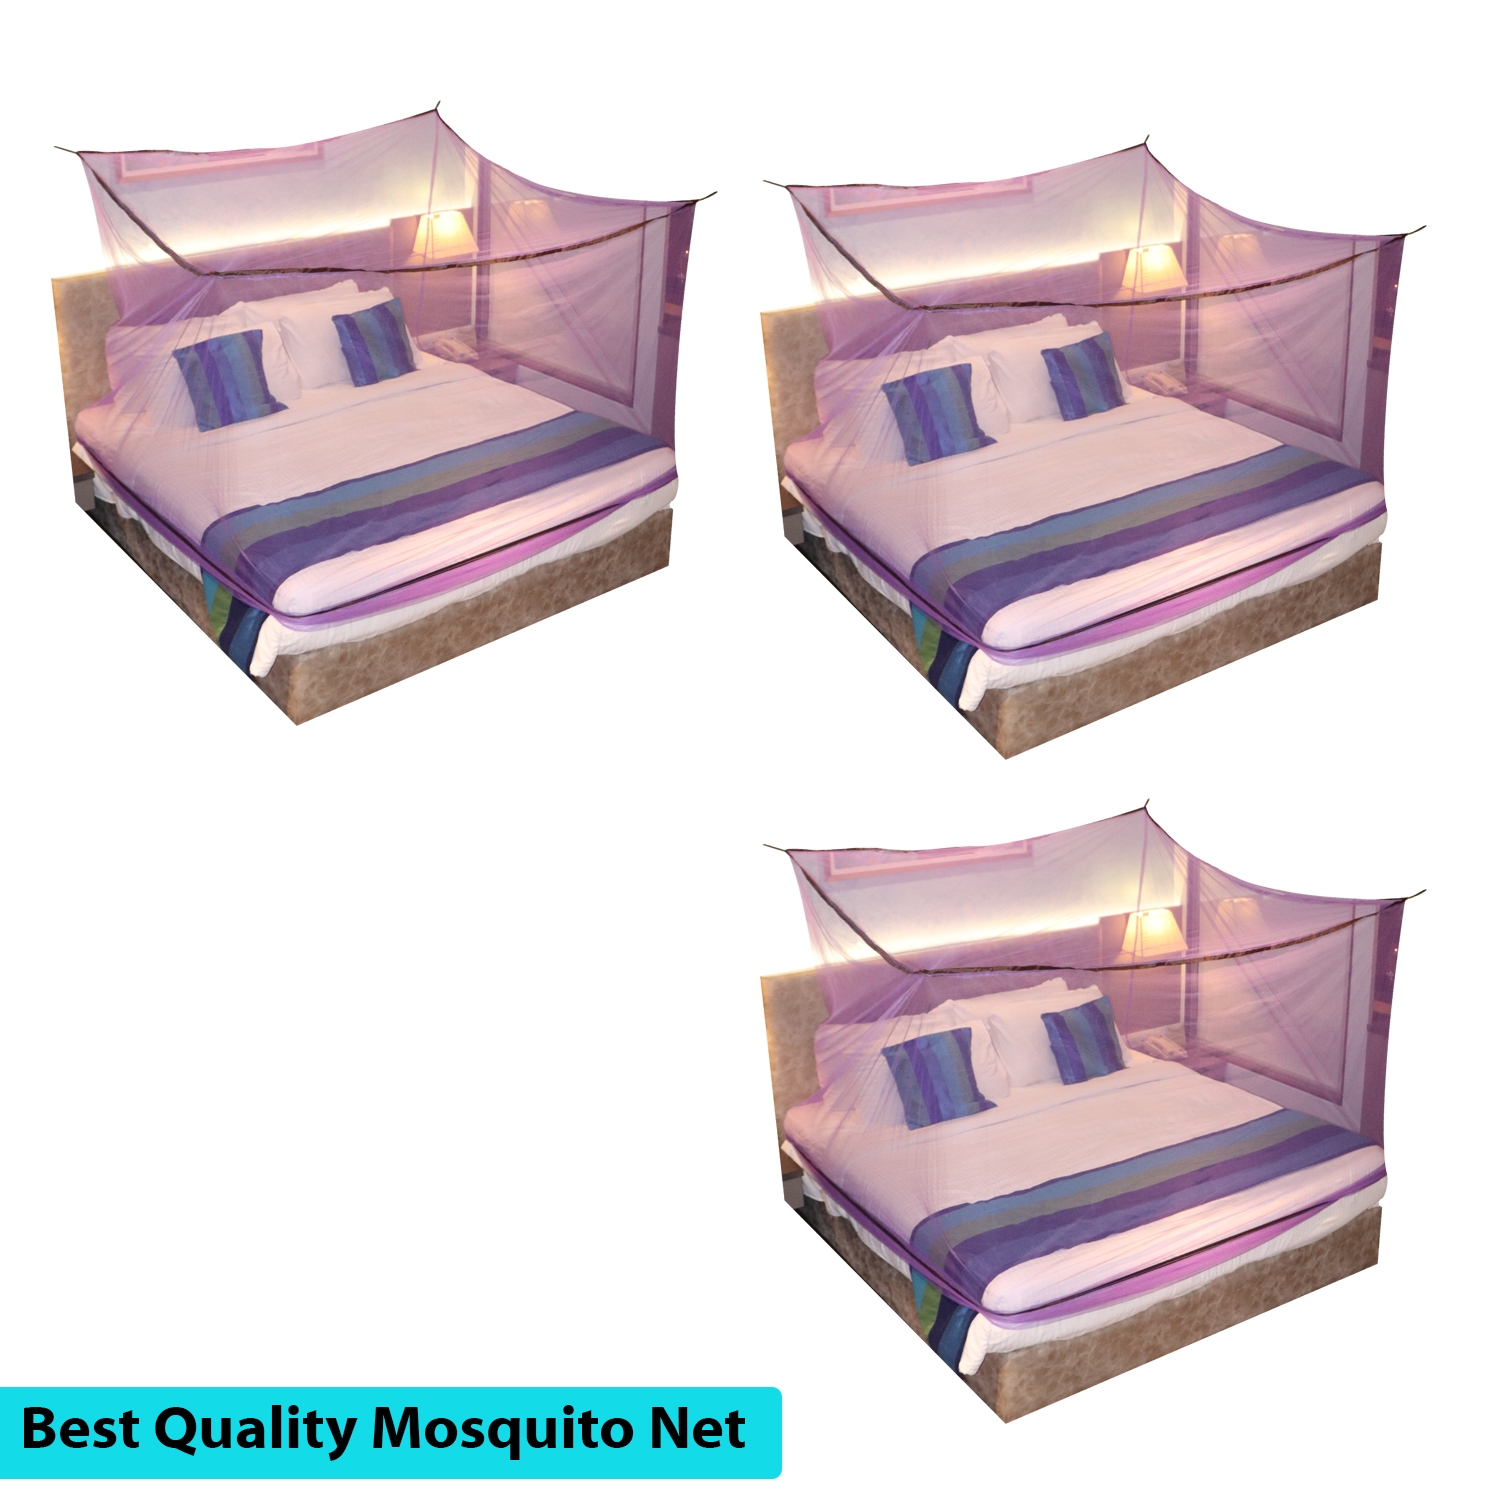 SILVER SHINE | Mosquito Net for Double Bed, King-Size, Square Hanging Foldable Polyester Net Purple And Brown Pack of 3 0